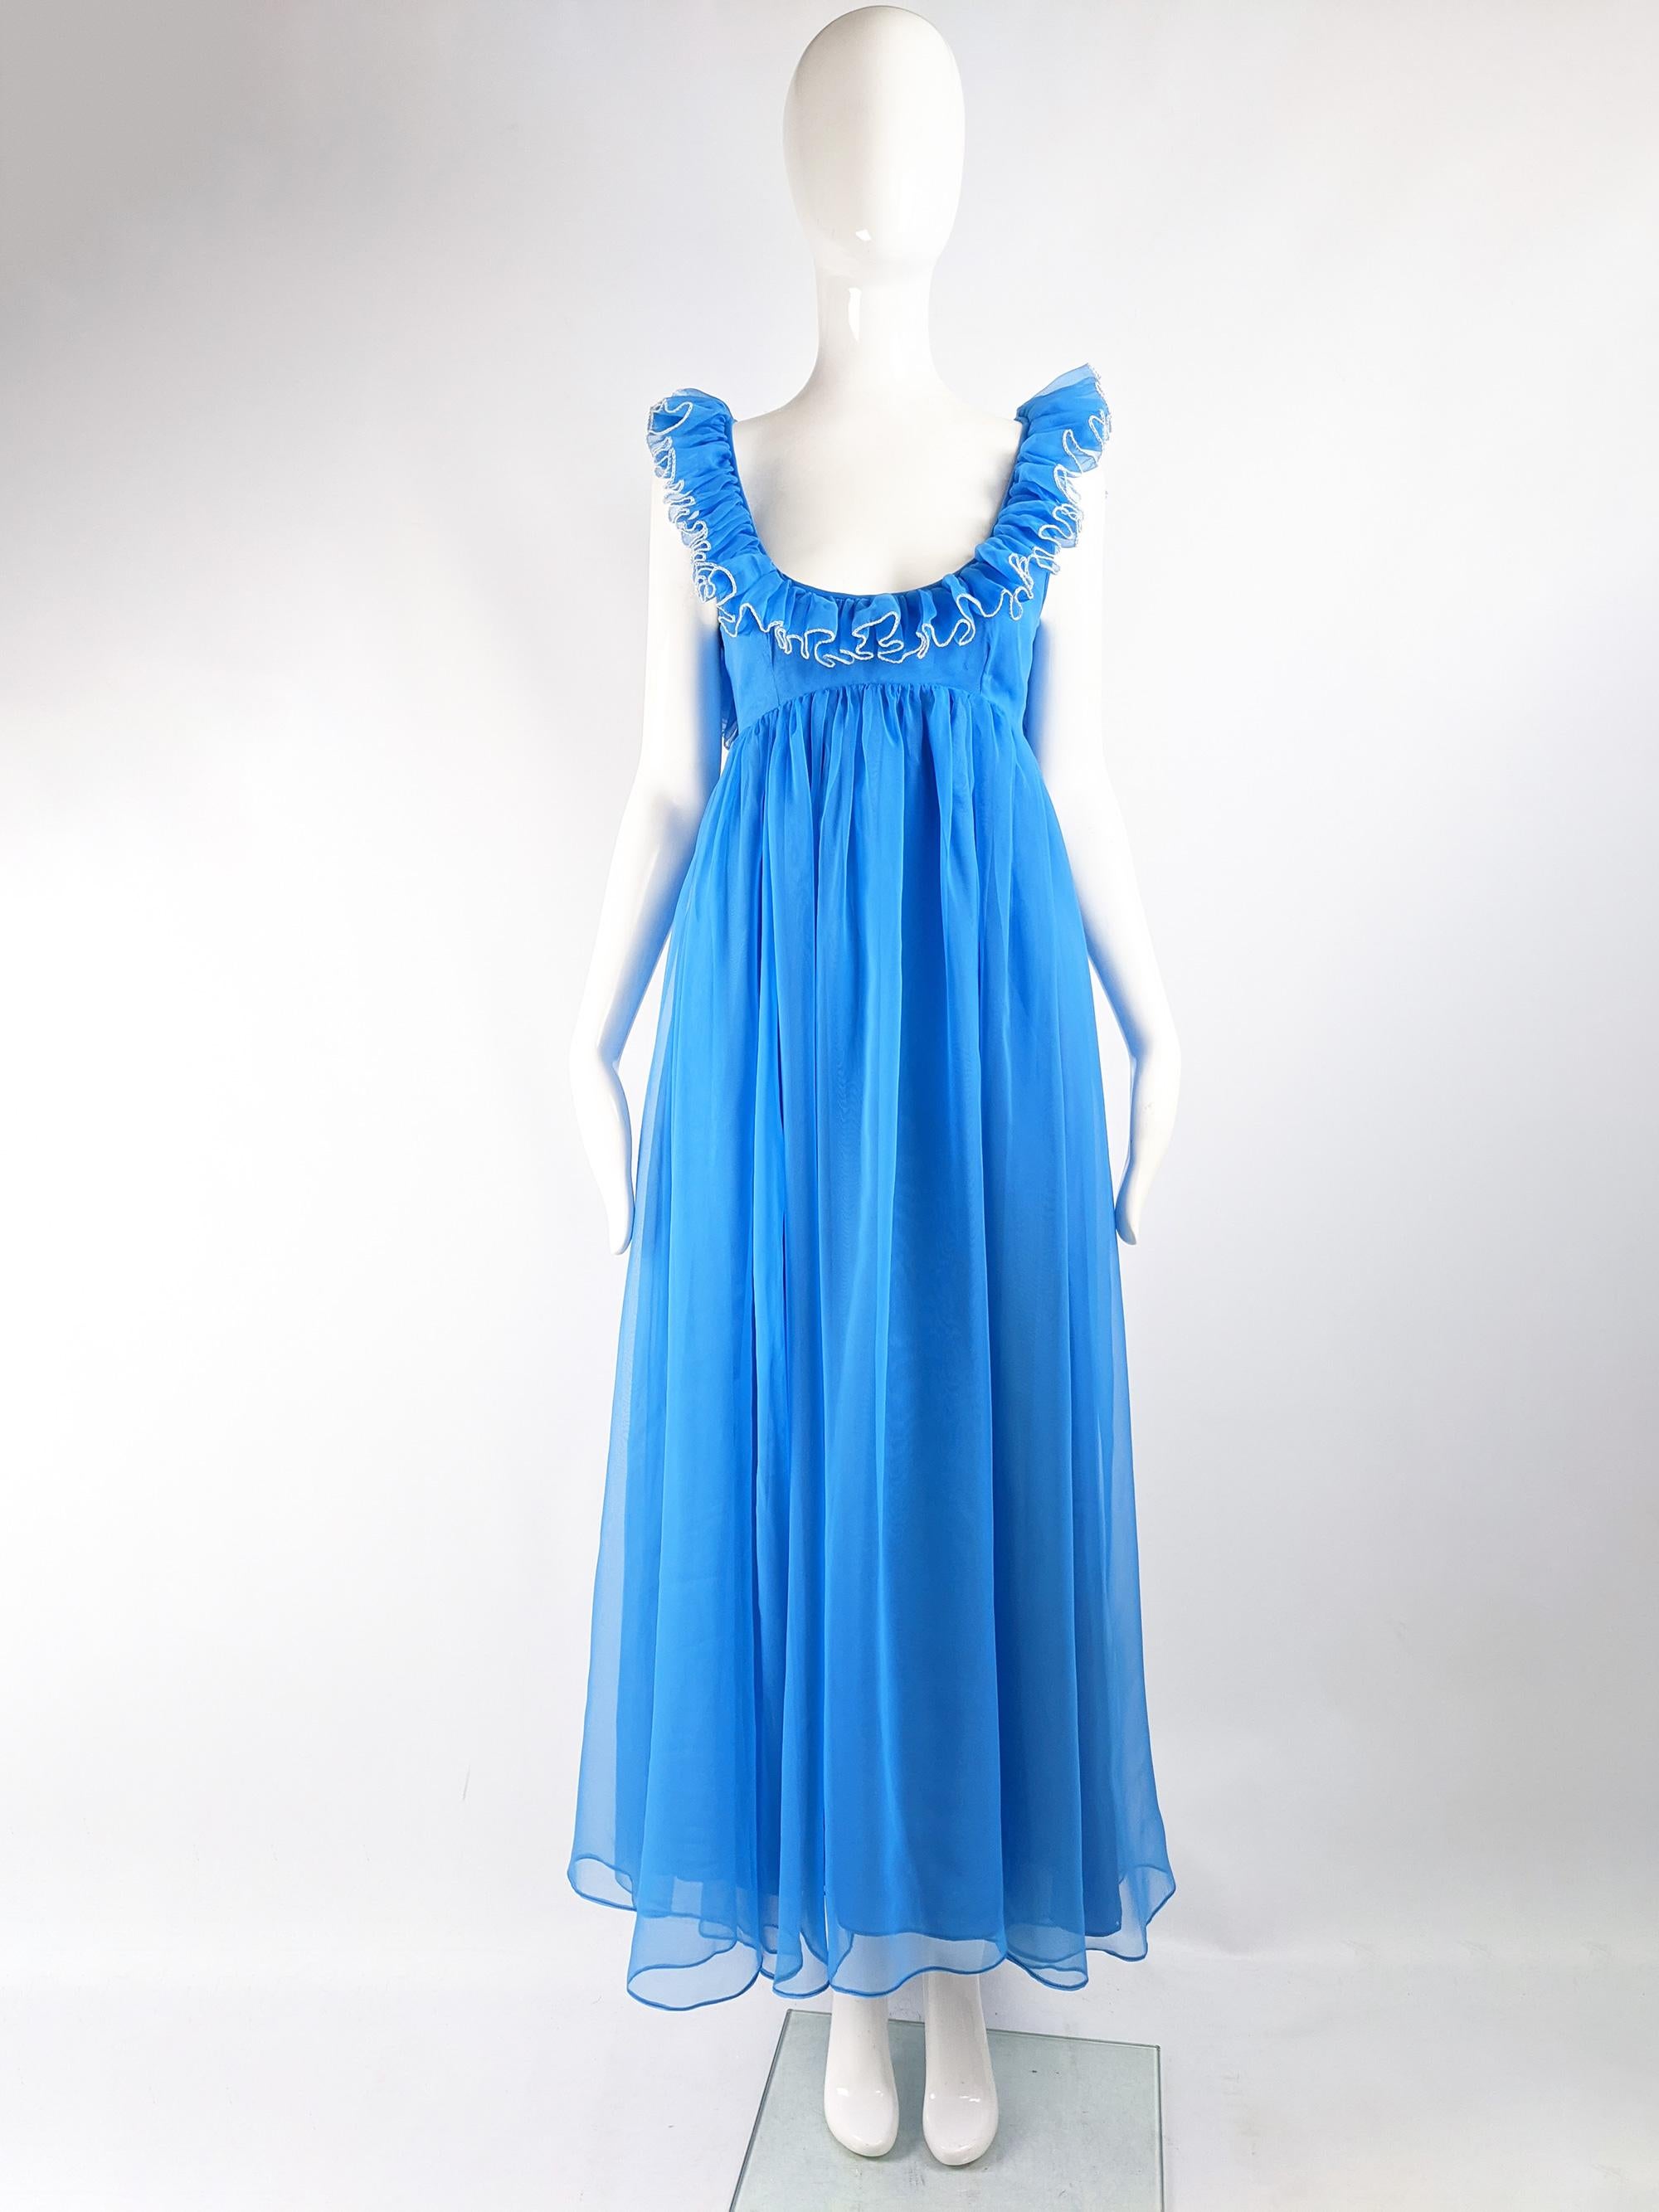 A beautiful vintage full length Jean Varon evening gown from the 60s, in a floaty blue chiffon with white edging and a fabulous ruffled collar and deep open back.

Size: Unlabelled; fits like a UK 10/ US 6/ EU 38. Please check measurements. 
Bust -